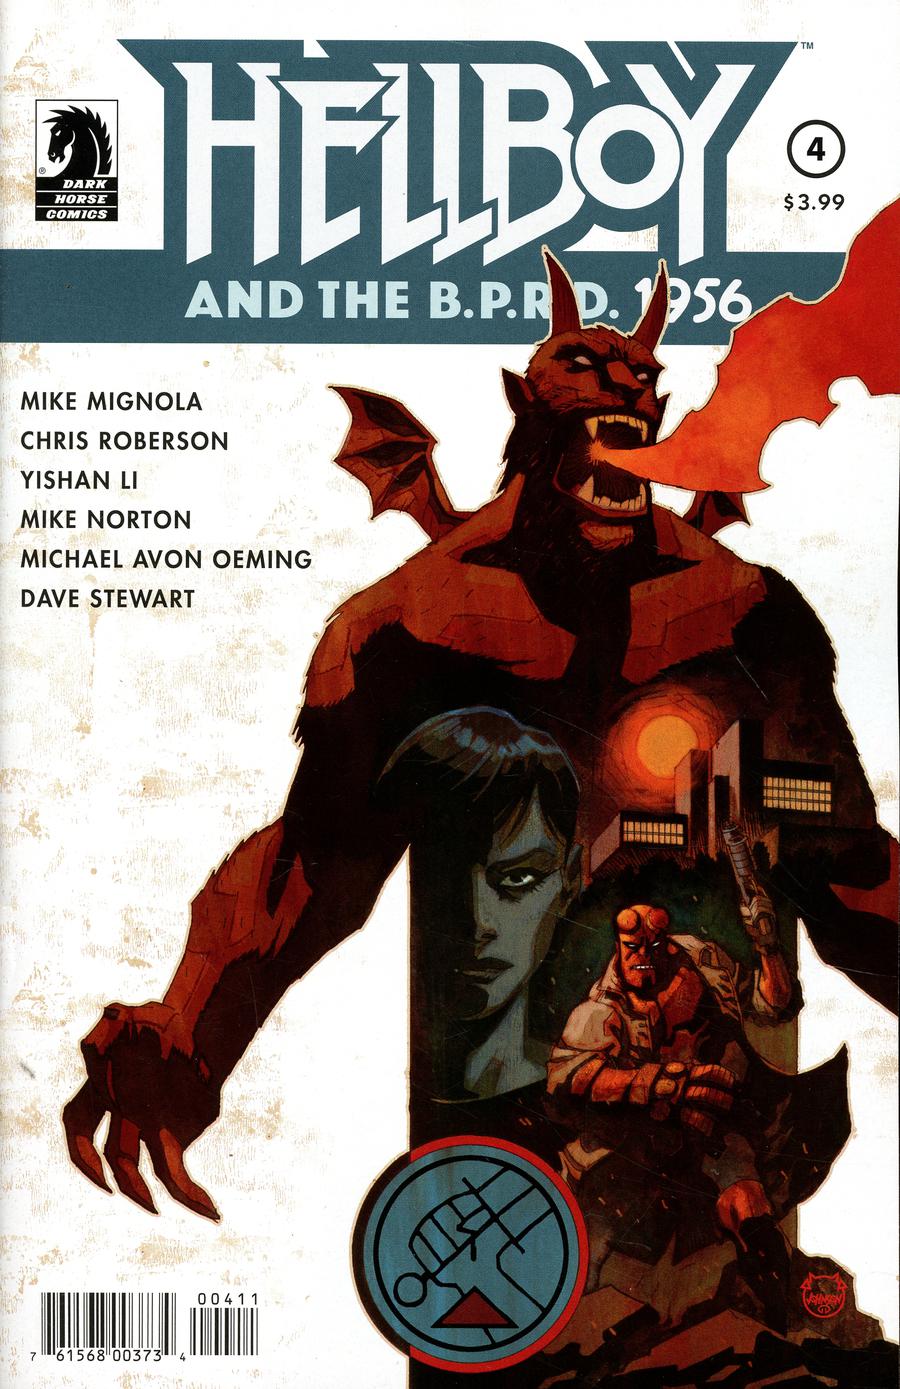 Hellboy And The BPRD 1956 #4